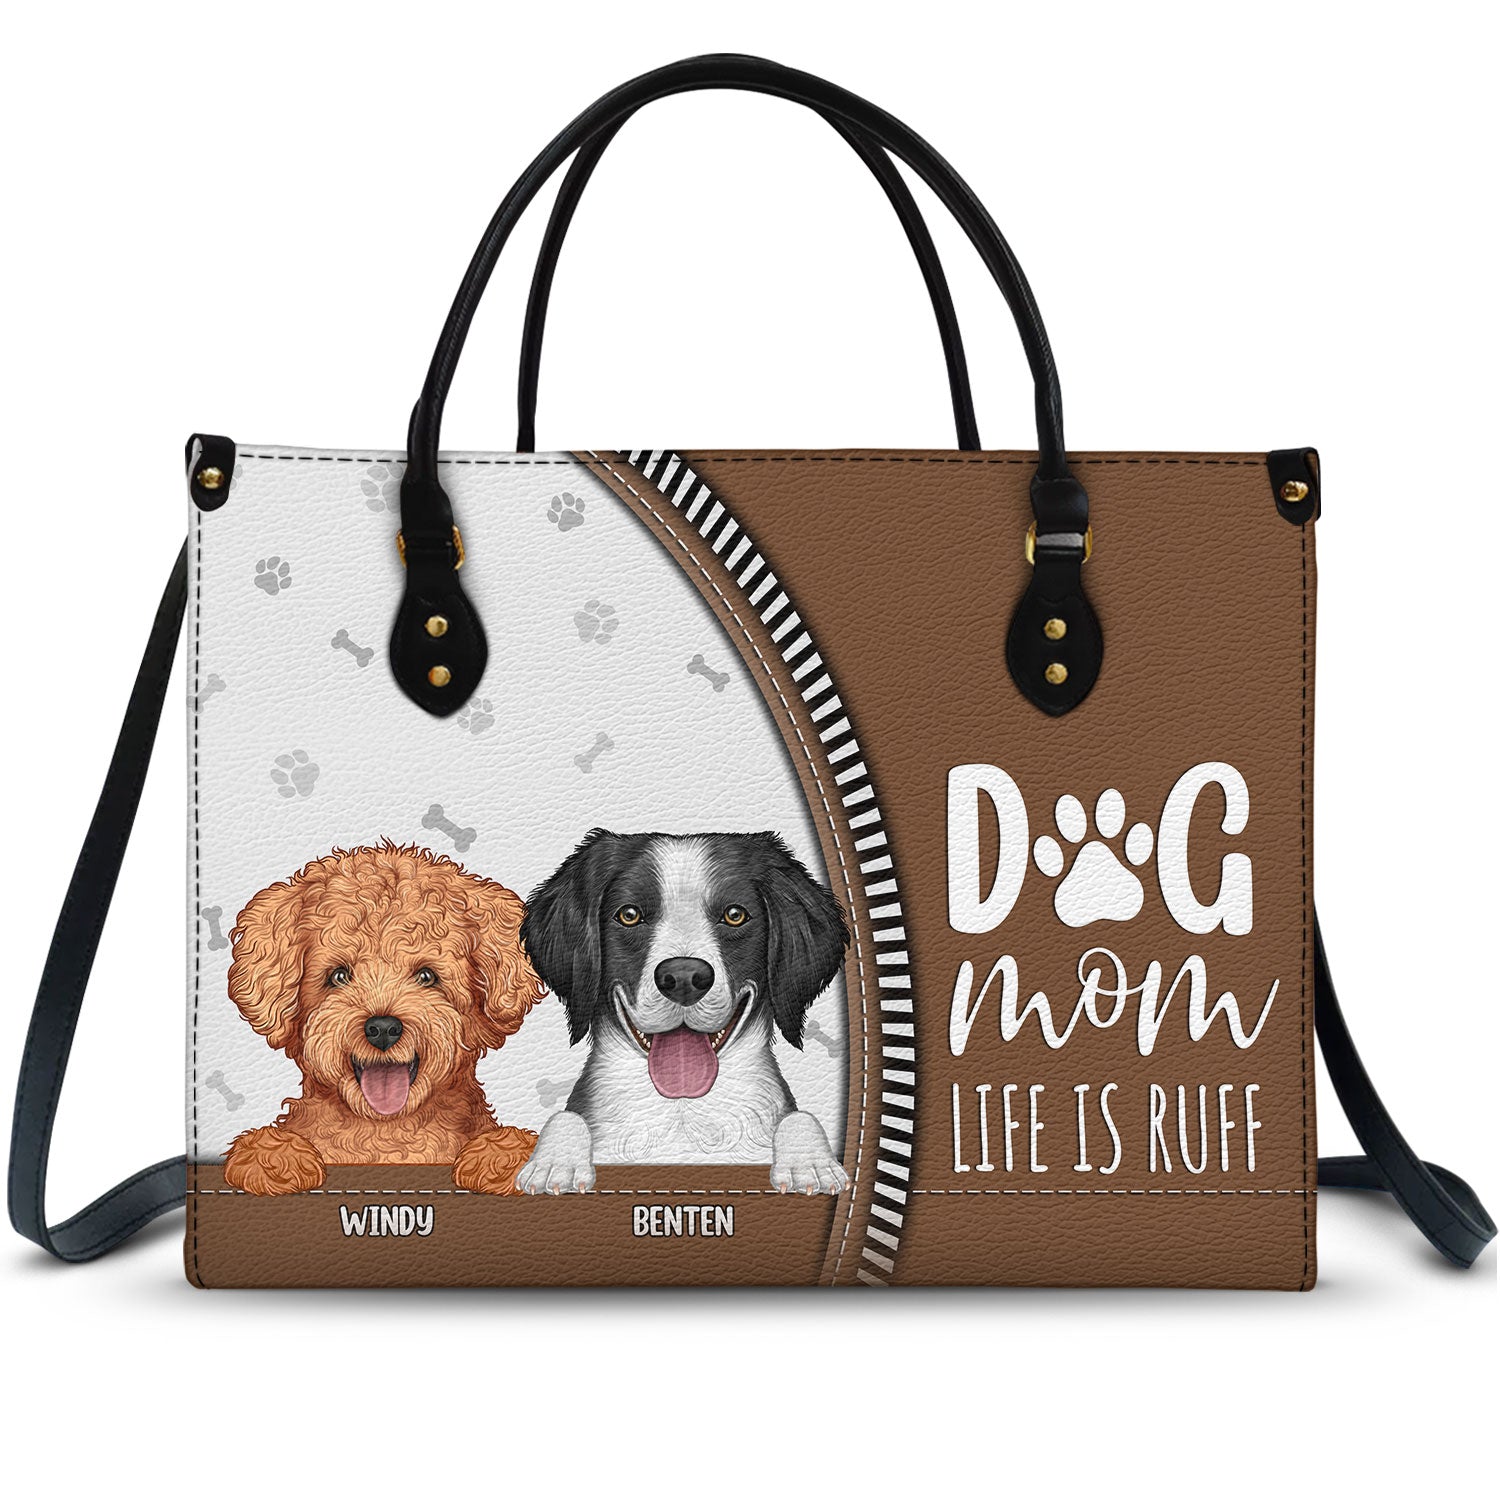 Dog Mom Life Is Ruff - Gift For Dog Mom - Personalized Leather Bag